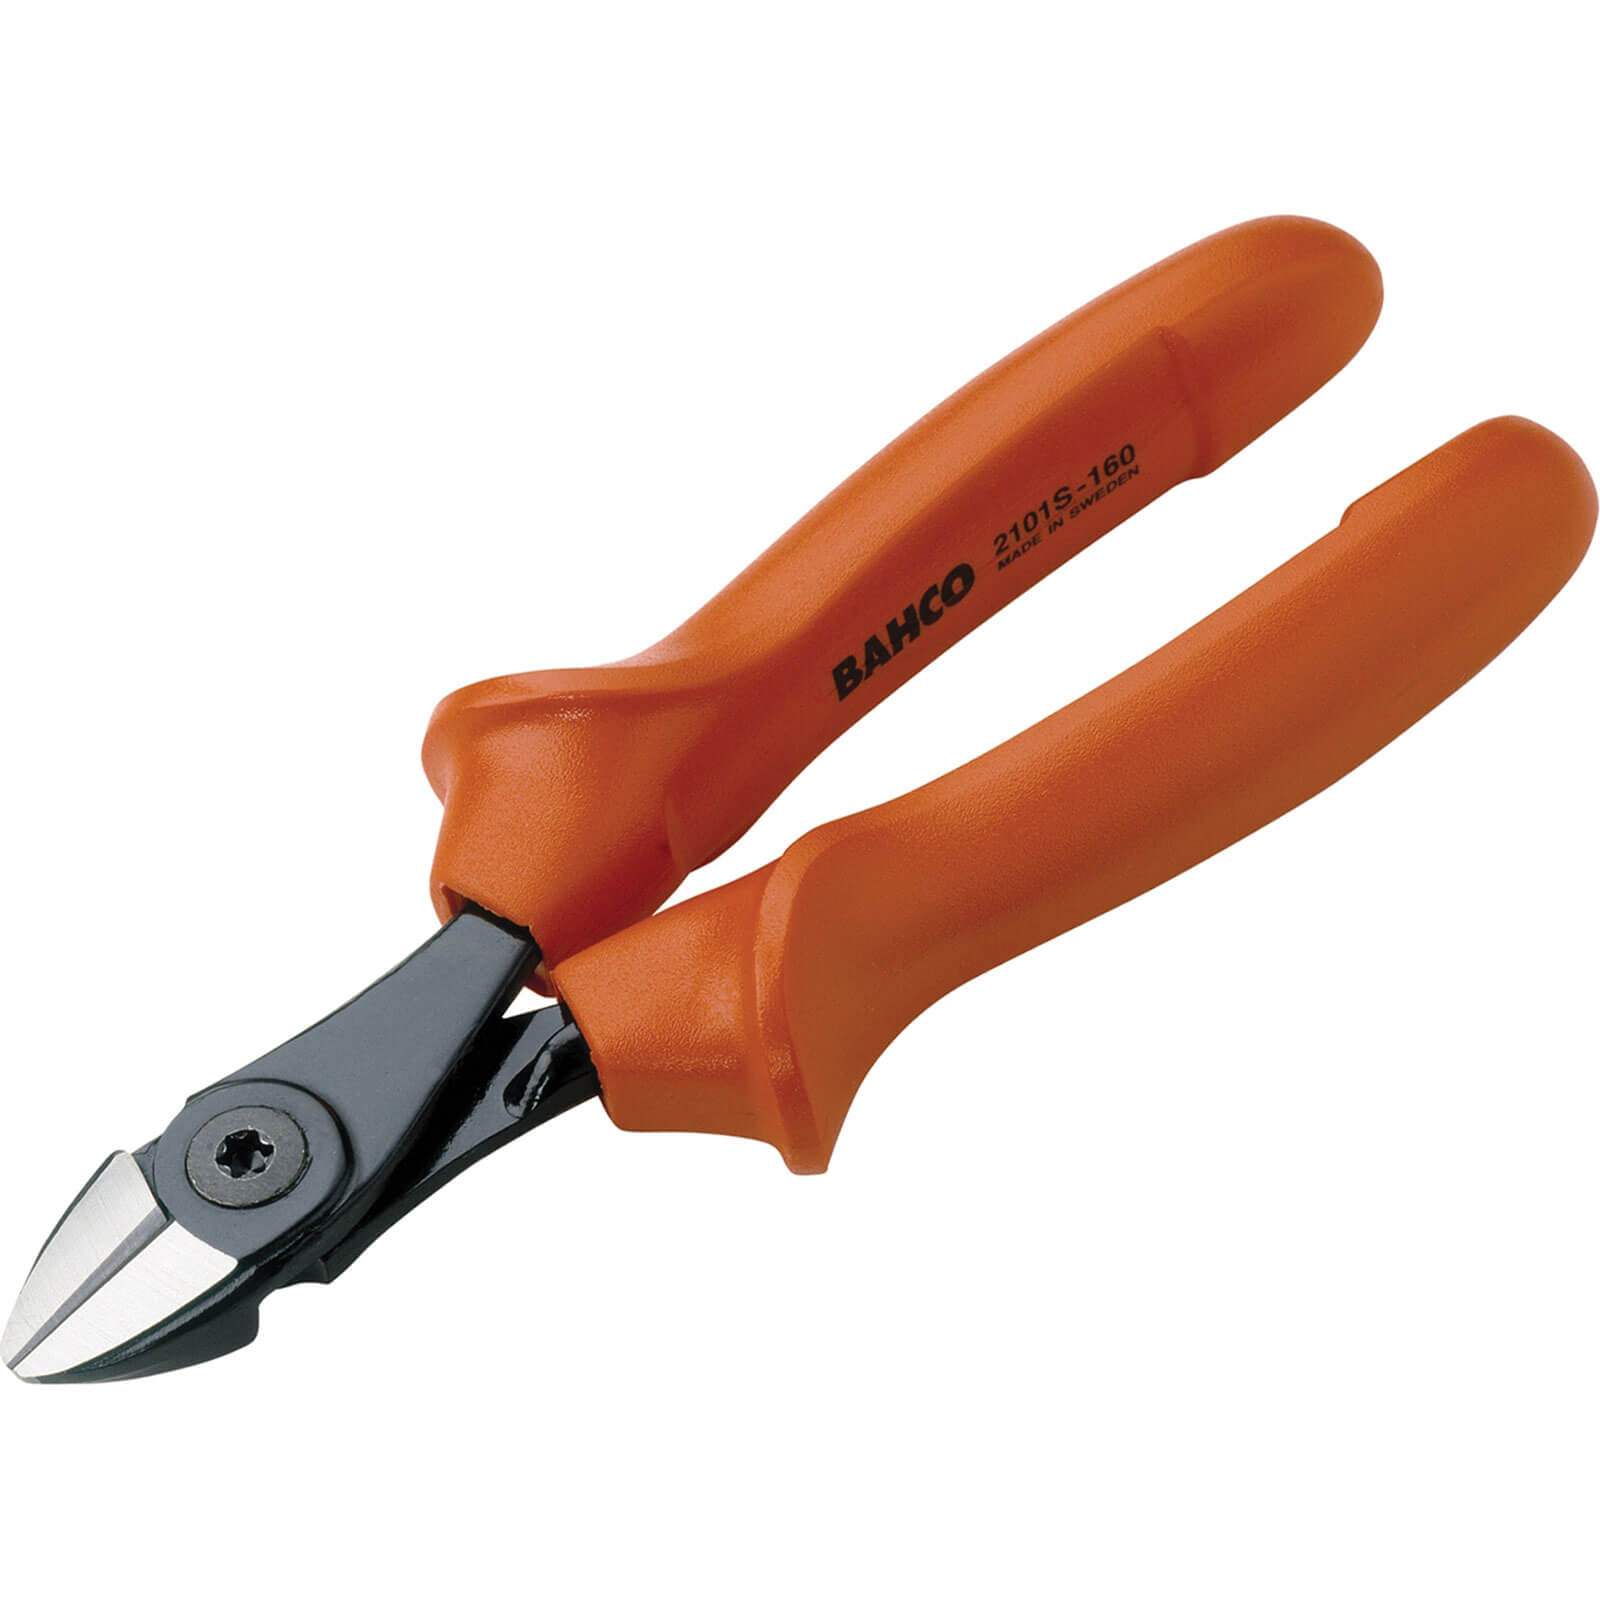 Photo of Bahco 2101s Ergo Insulated Side Cutting Pliers 180mm